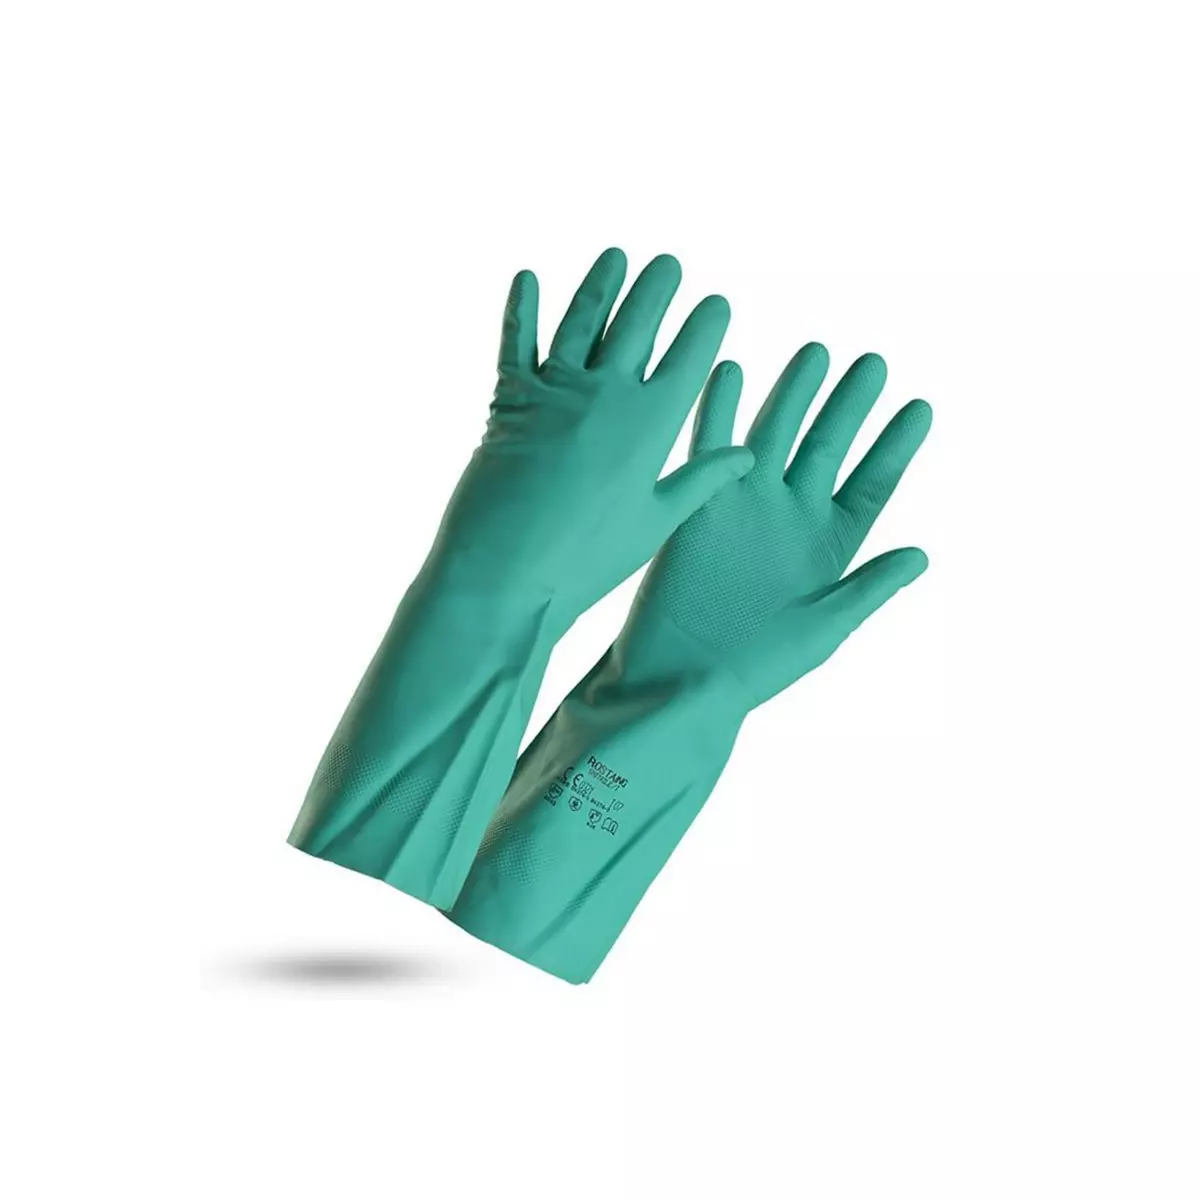 ROSTAING Gants de protection chimique SNITRILE - Taille 7 - Rostaing